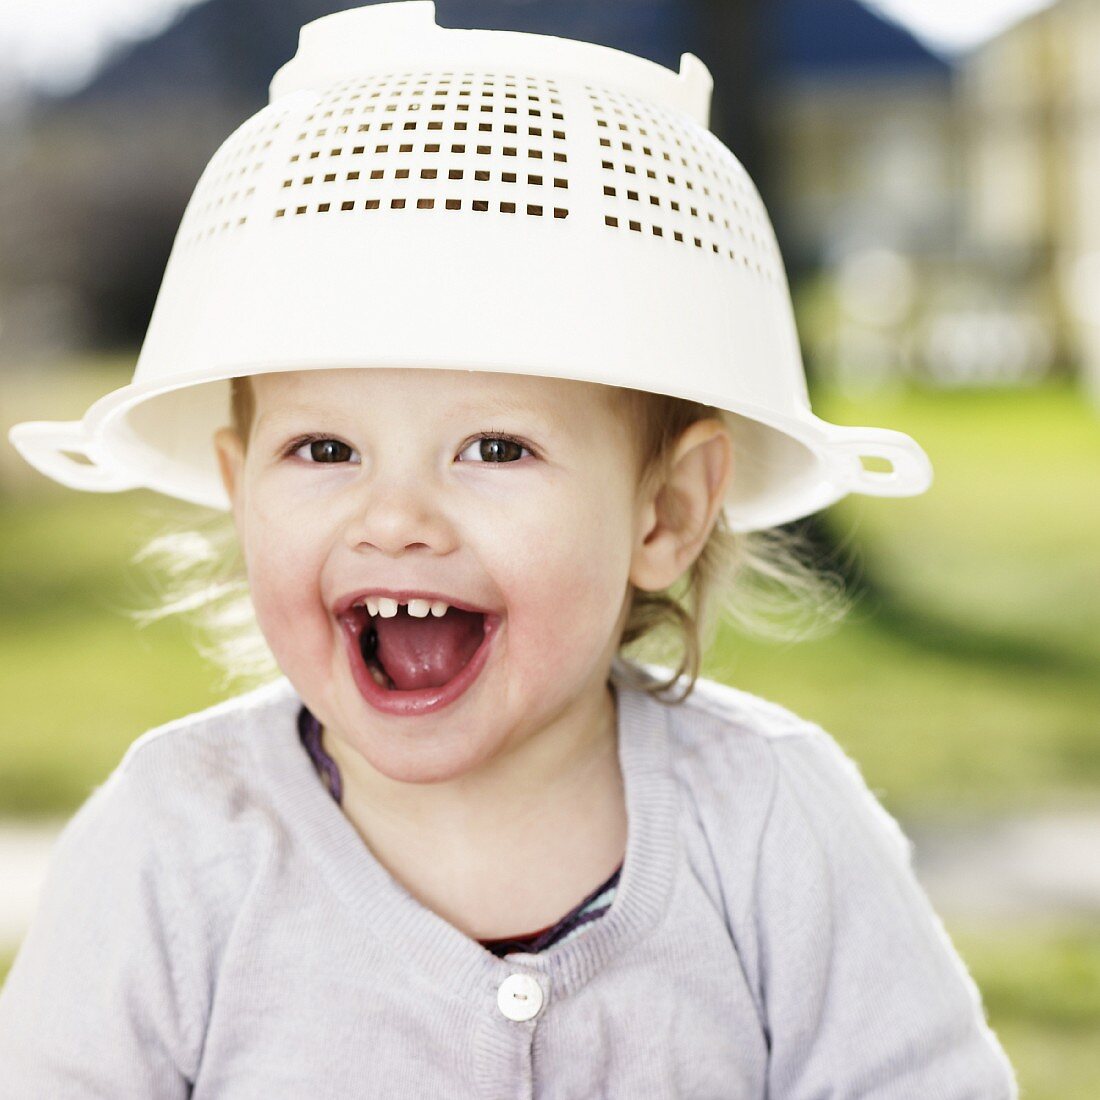 A little girl with a plastic colander on her head